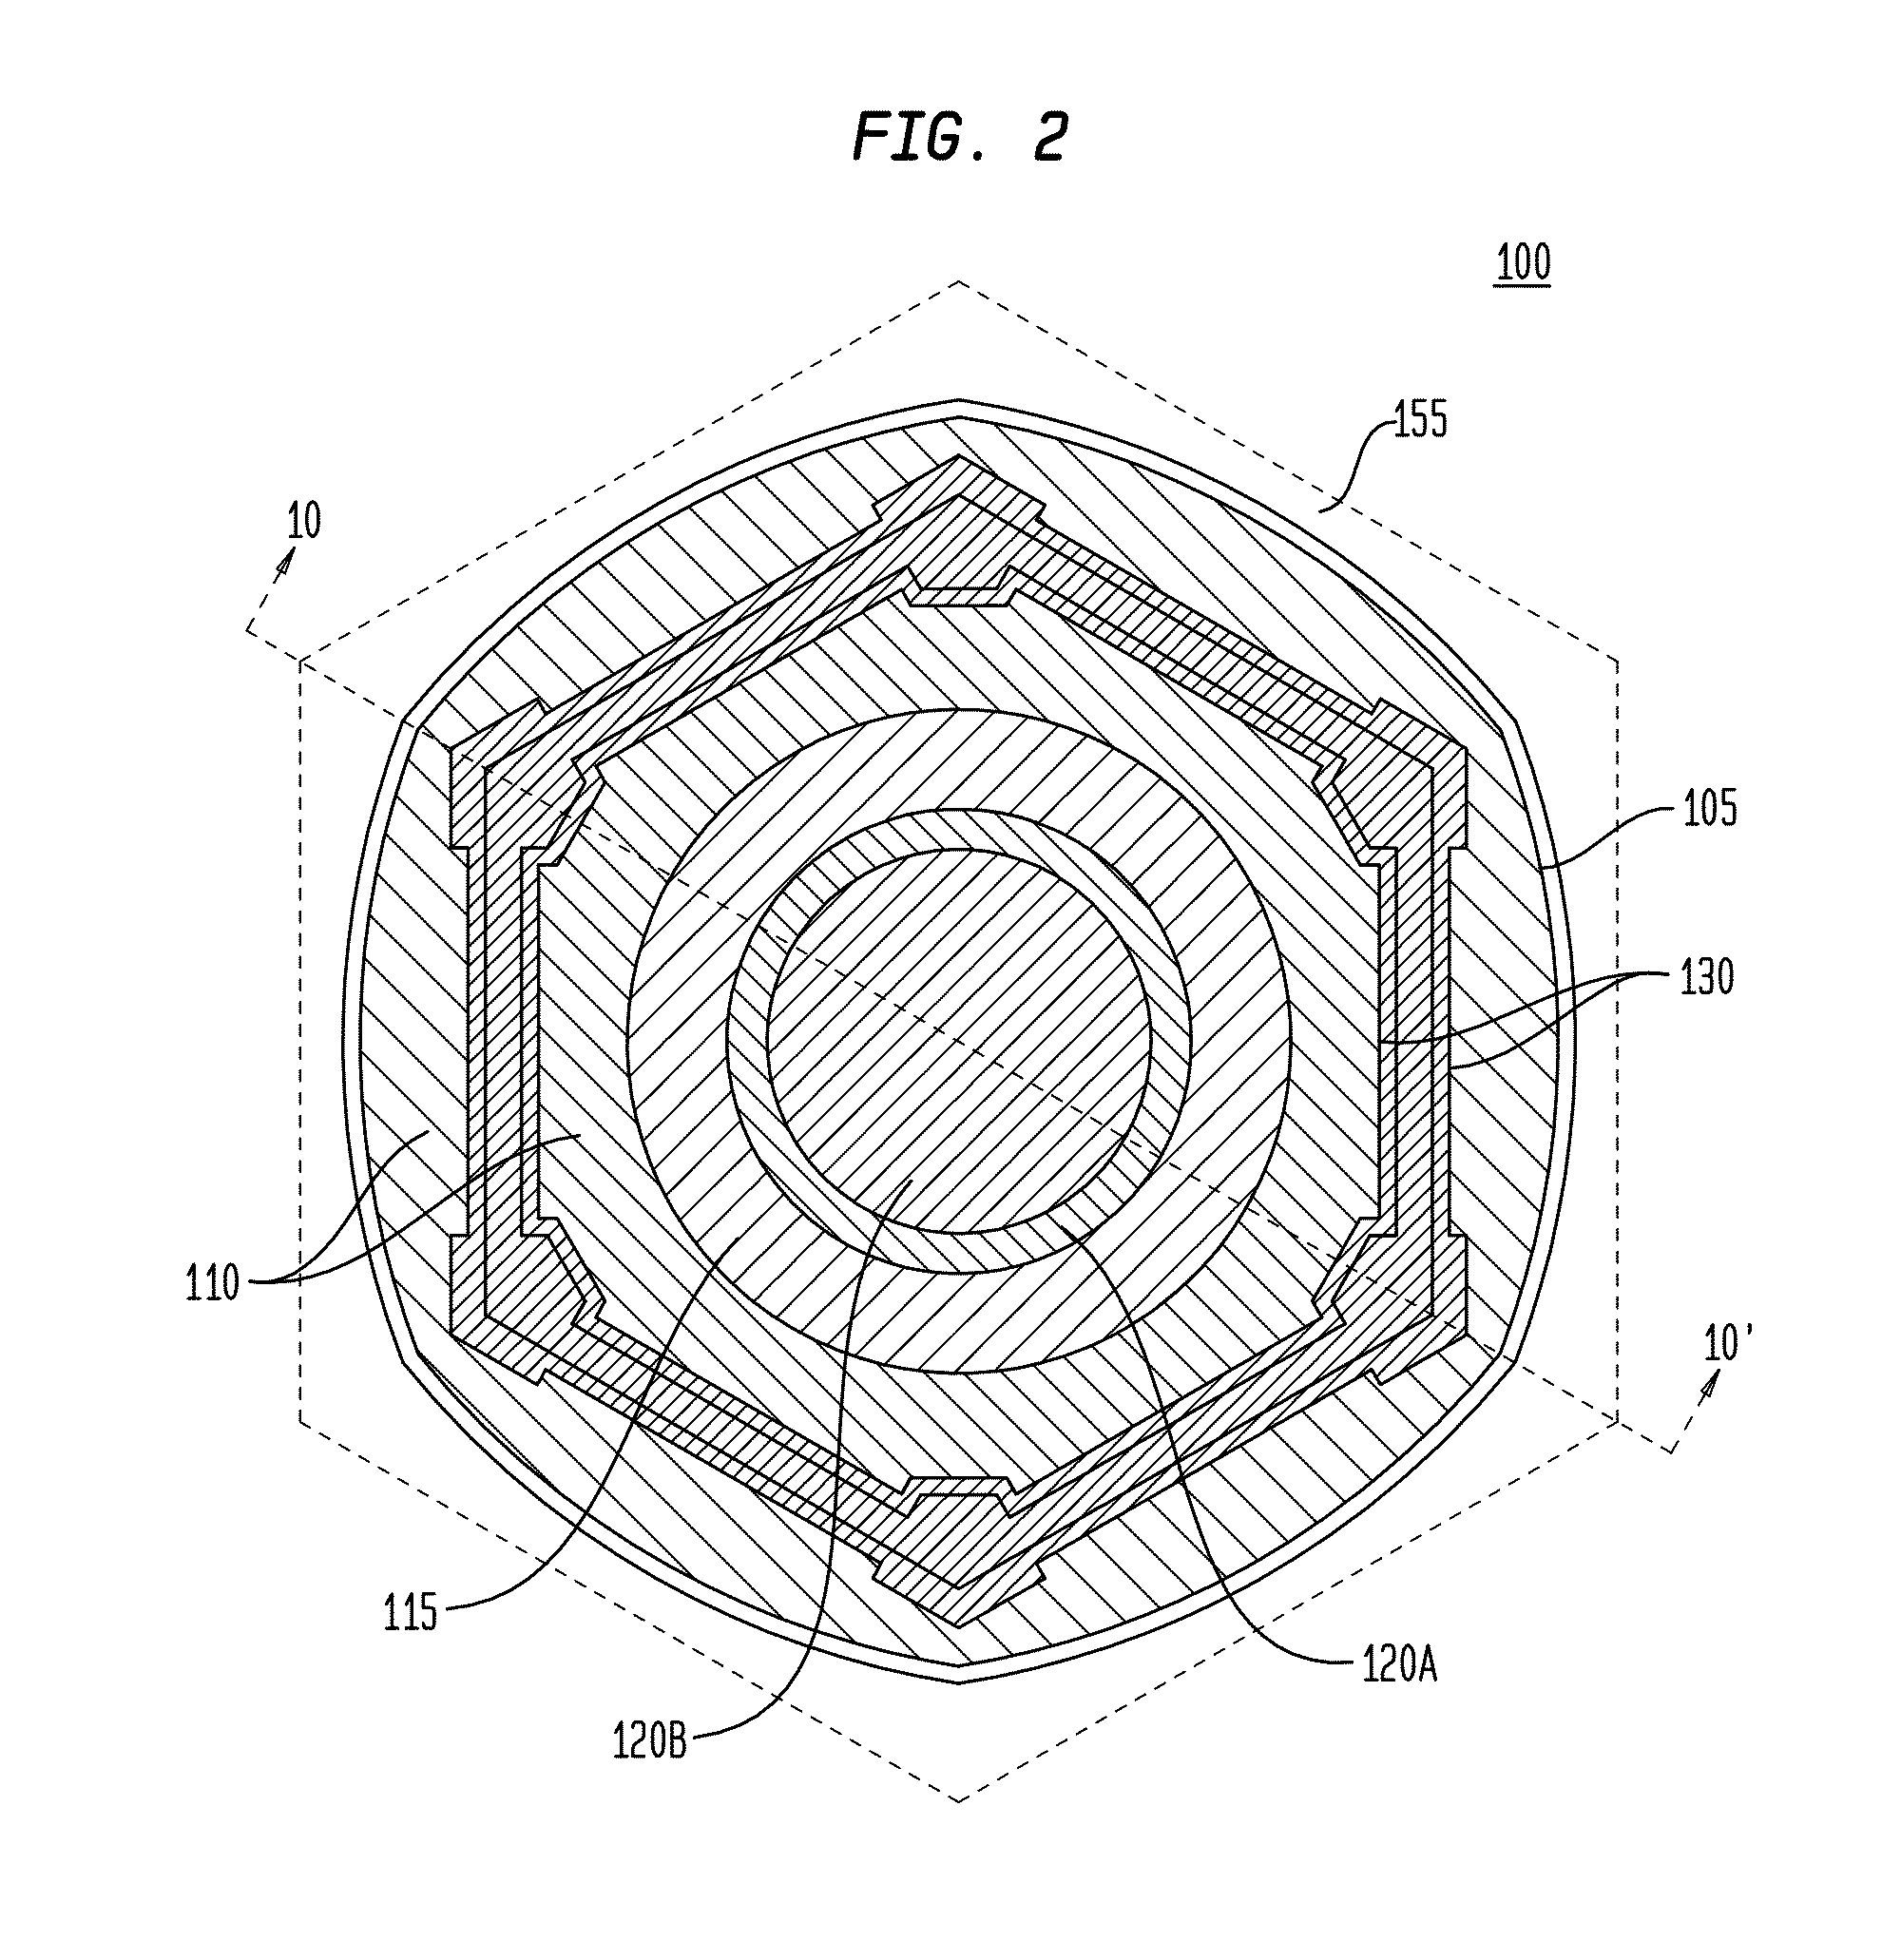 Apparatus with light emitting or absorbing diodes